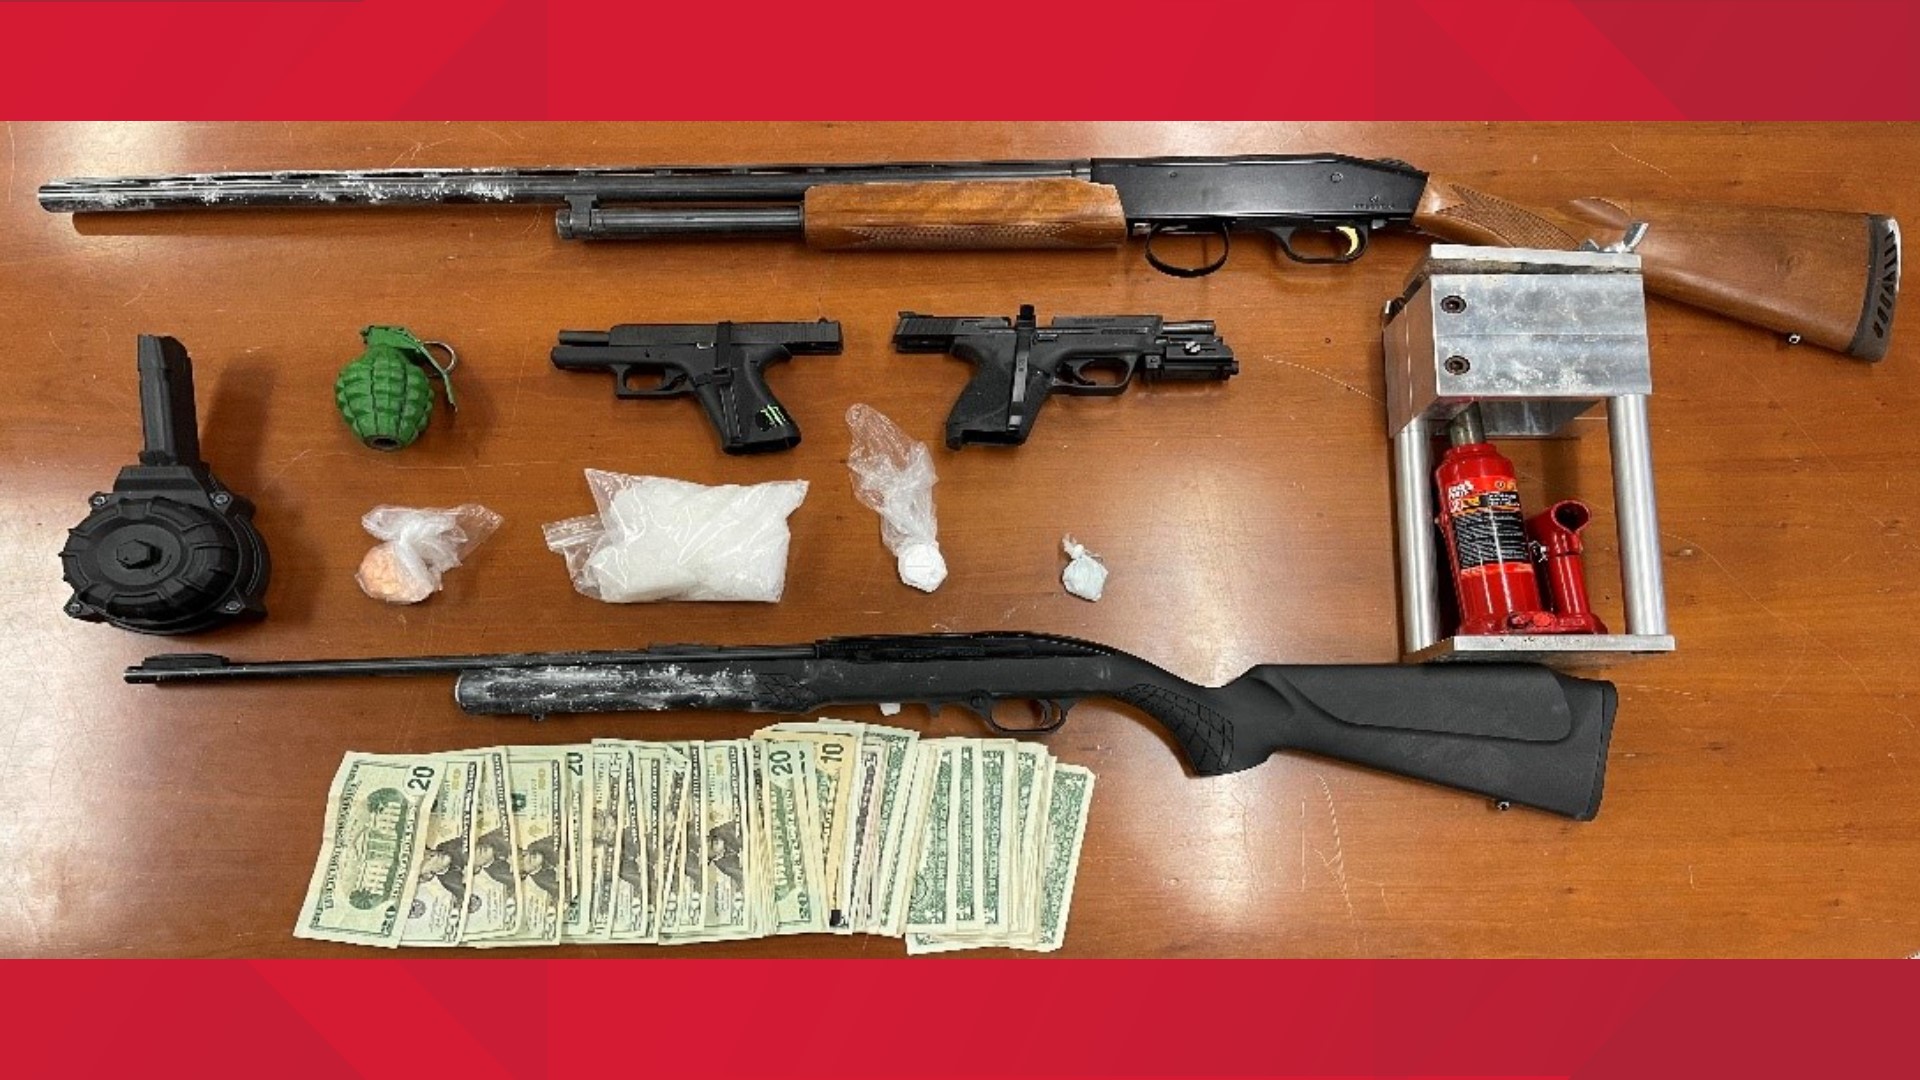 An investigation into a violent felon in Indianapolis led to three arrests and the seizure of a half-pound of meth, a grenade, guns, money and other drugs.